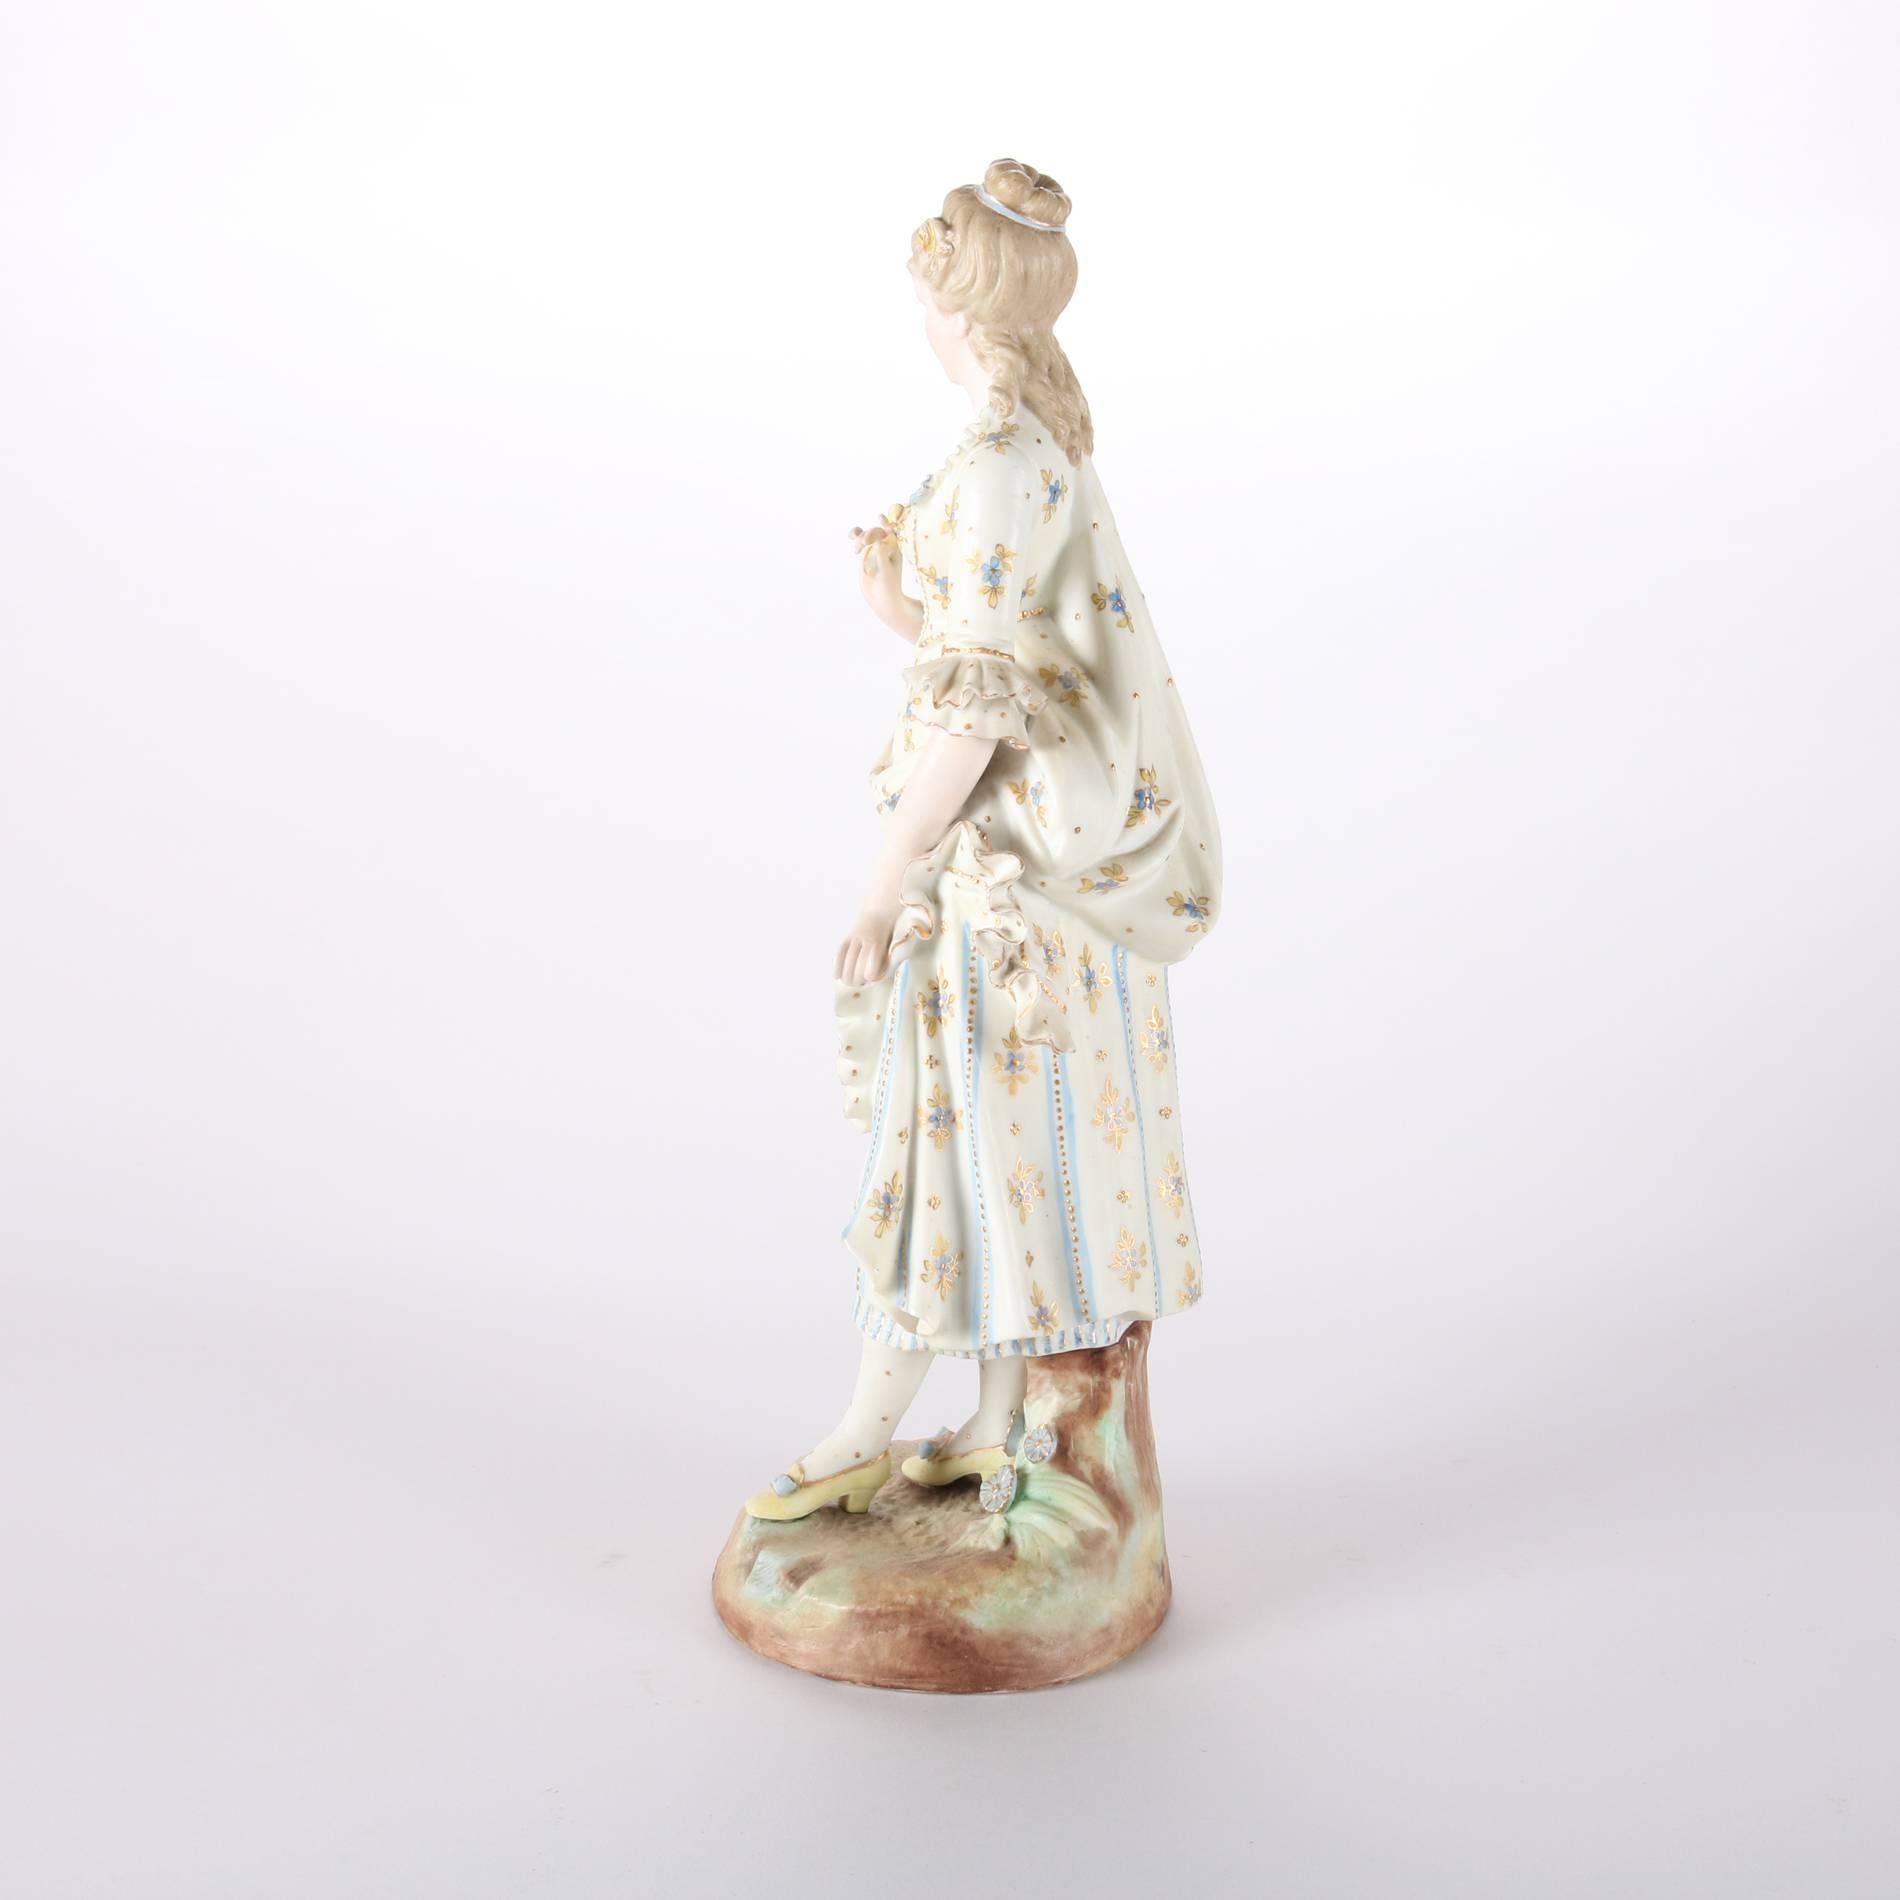 Antique large English porcelain figurine features hand-painted female in floral dress and highlighted in gilt, signed on base, 19th century

Measures - 16.25